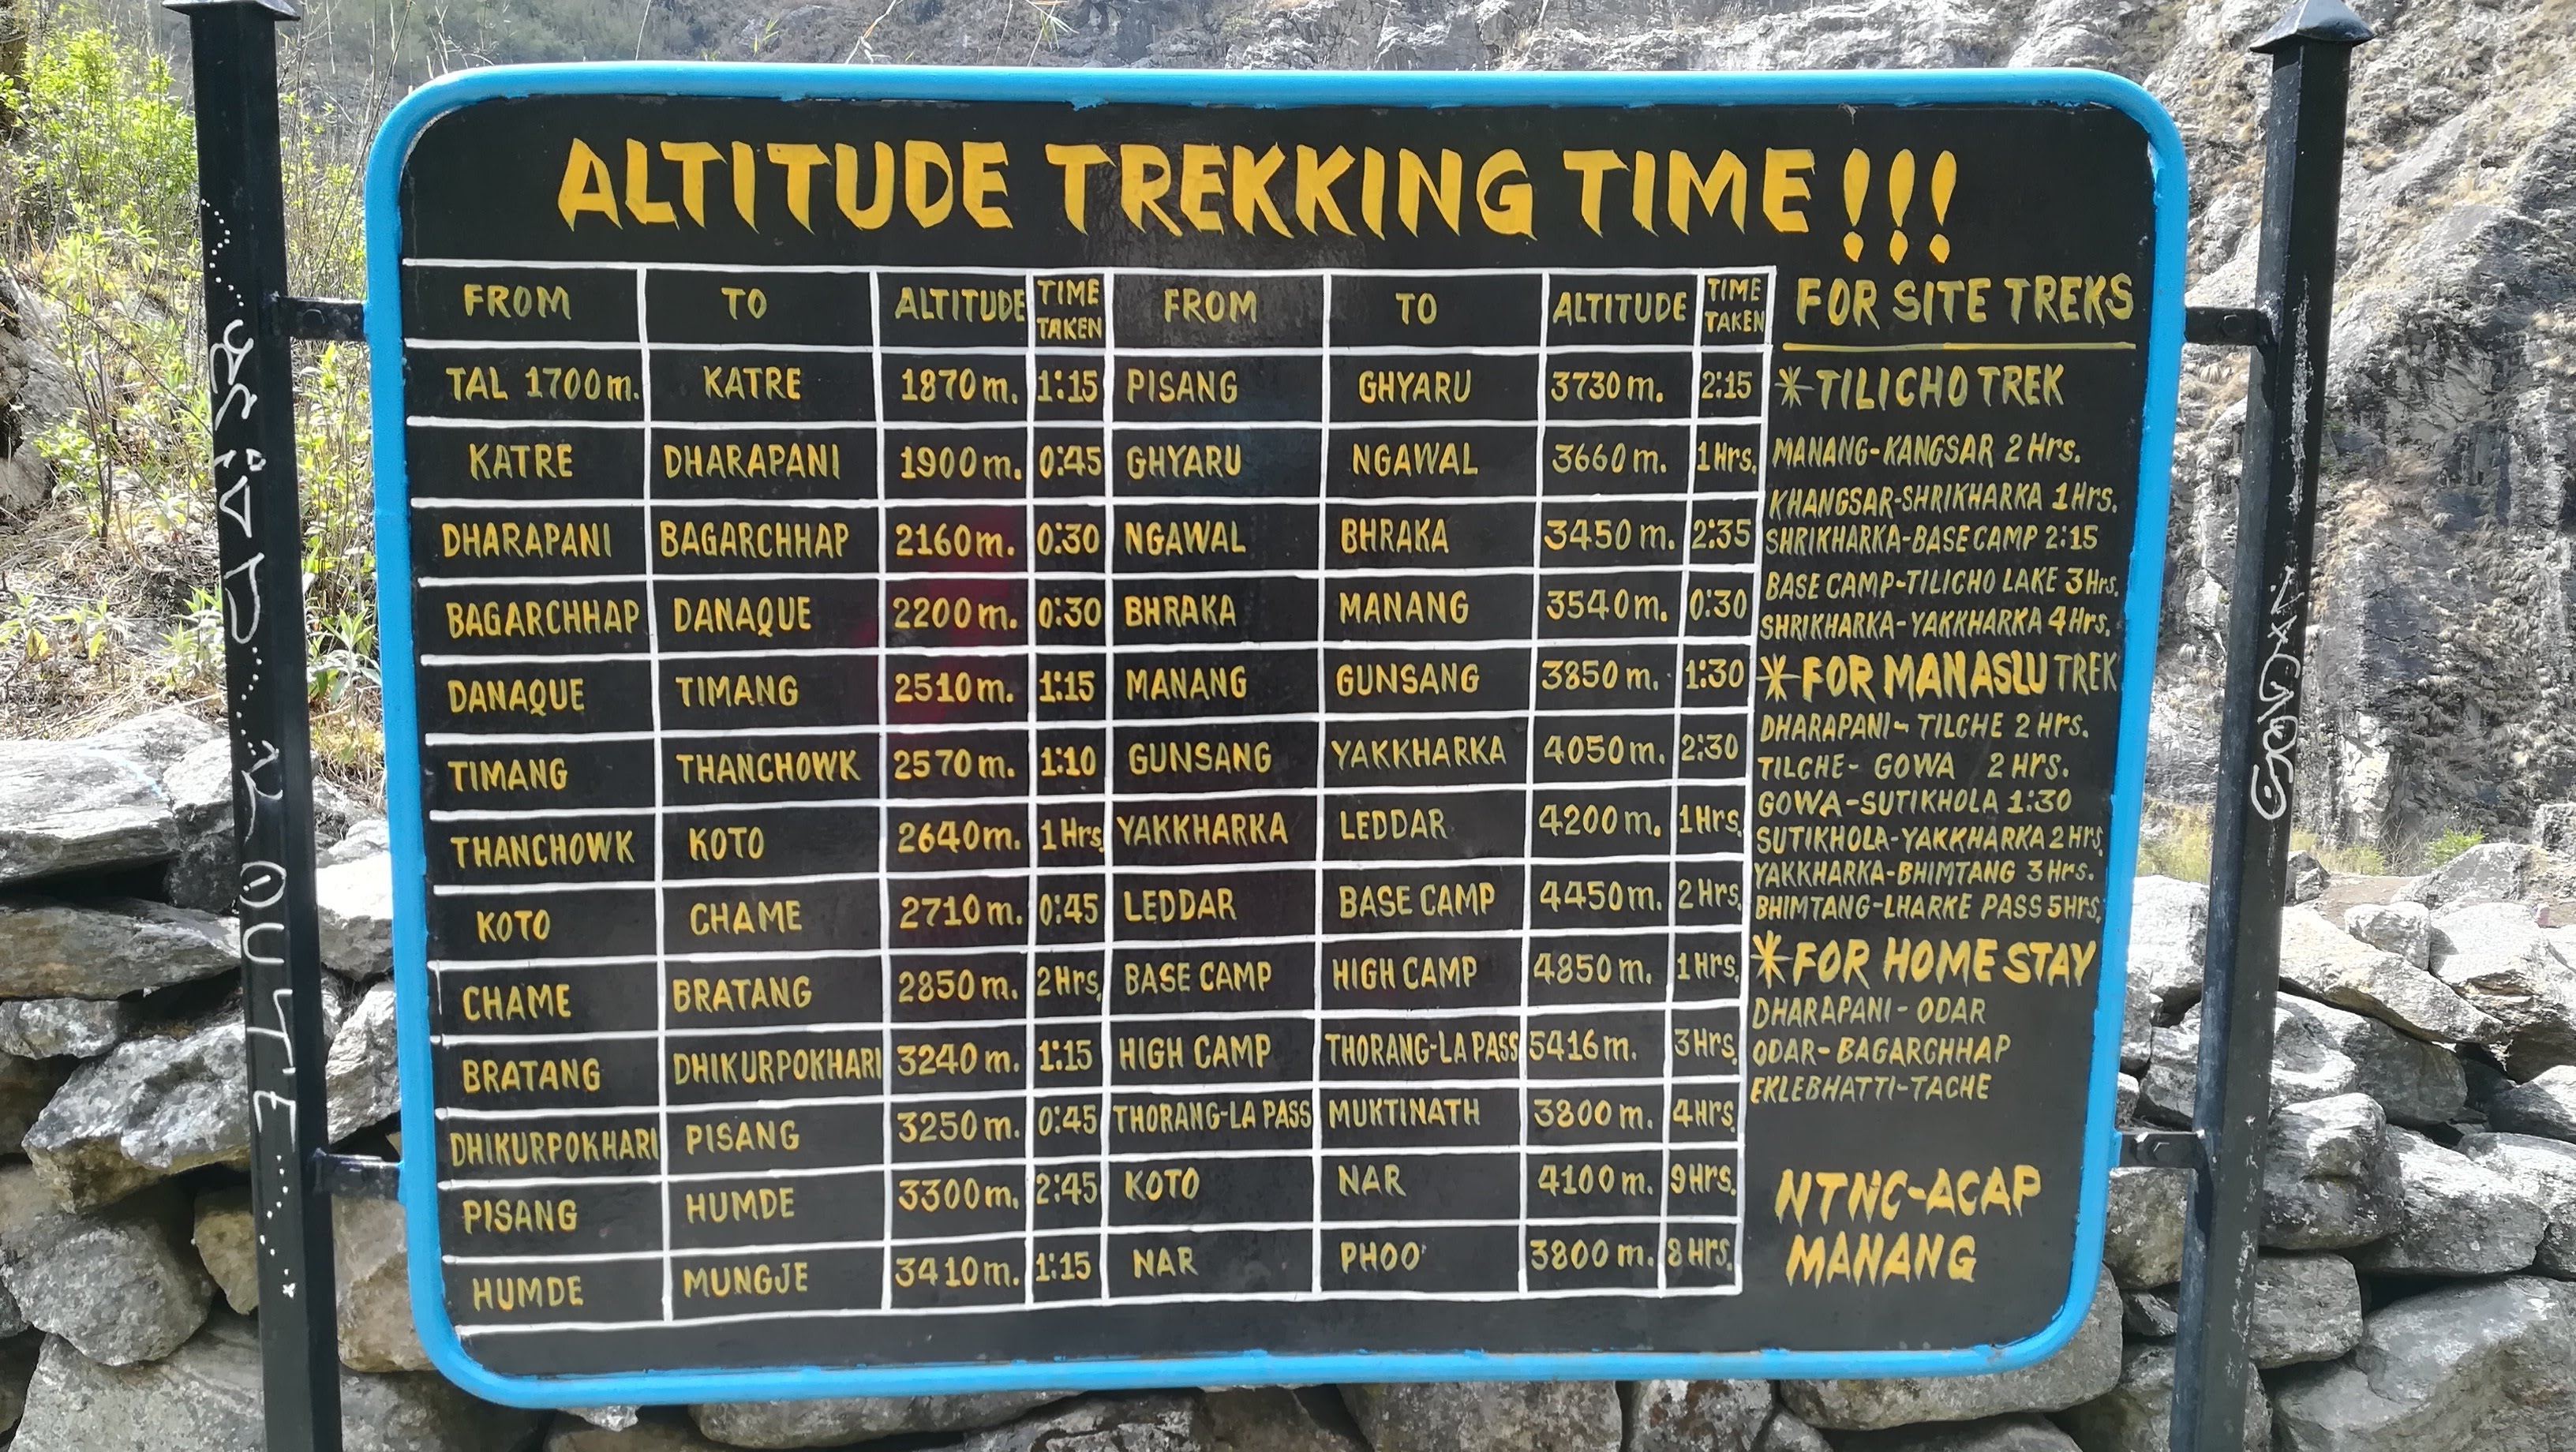 Annapurna Circuit walking times and altitudes